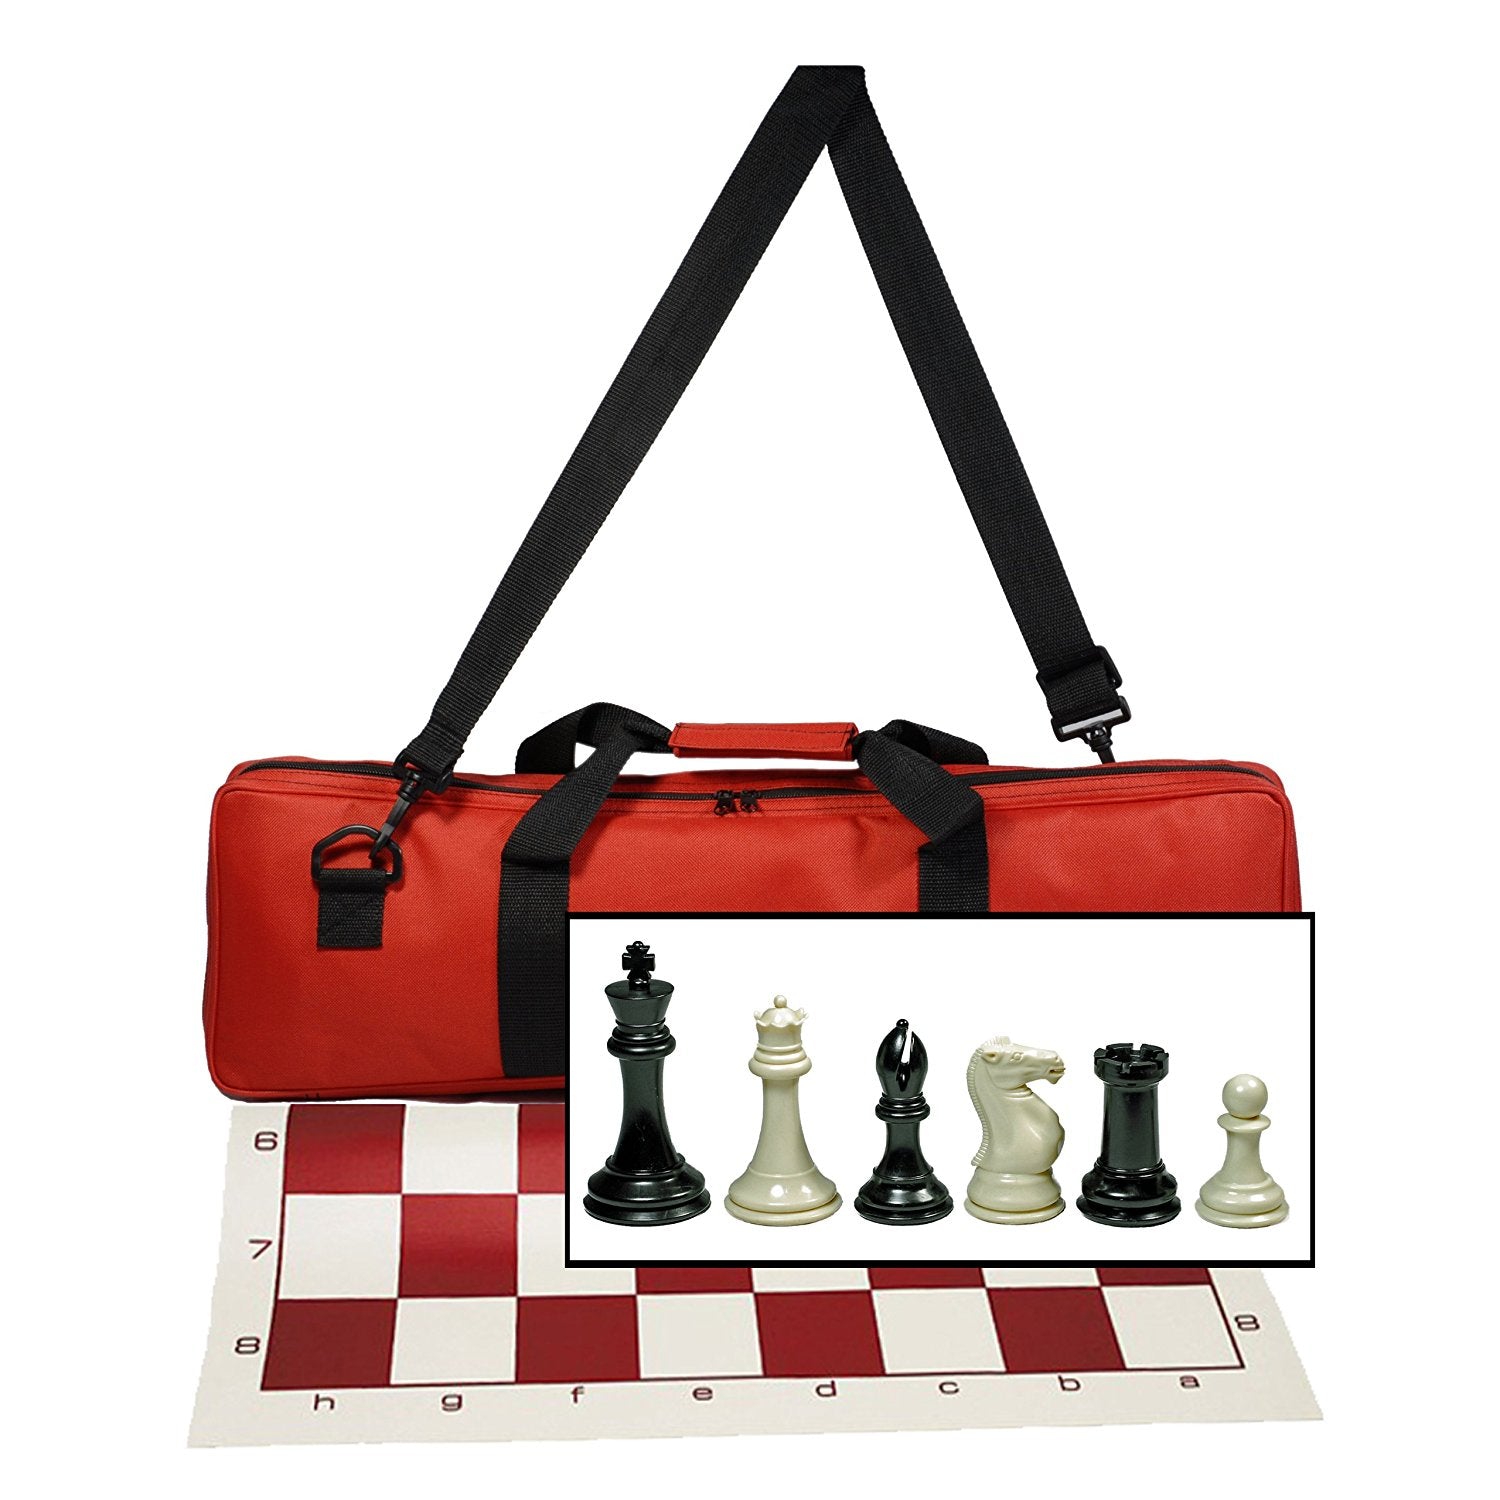 Vtg 1973 Executive Games Inc Check/mate Magnetic Chess Set in canvas Bag  TLC